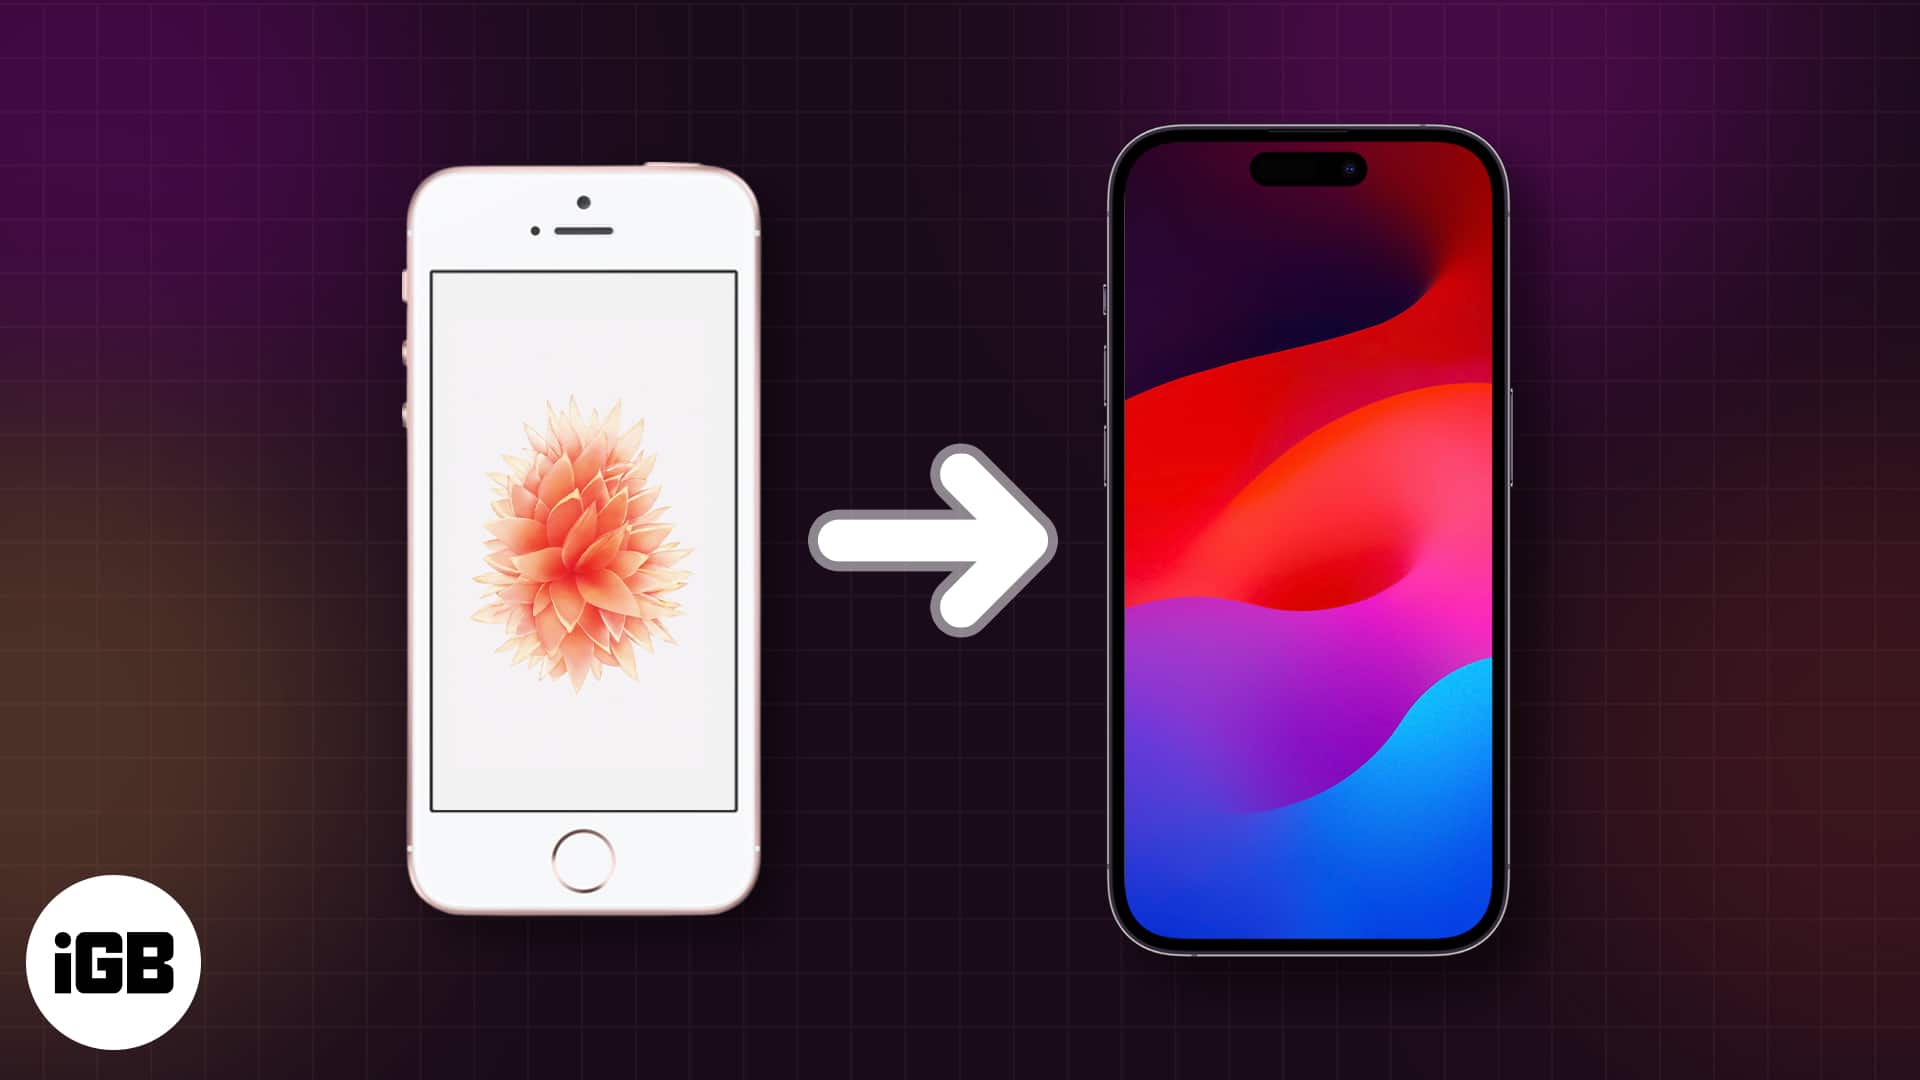 Transfer your data from old iphone to new iphone